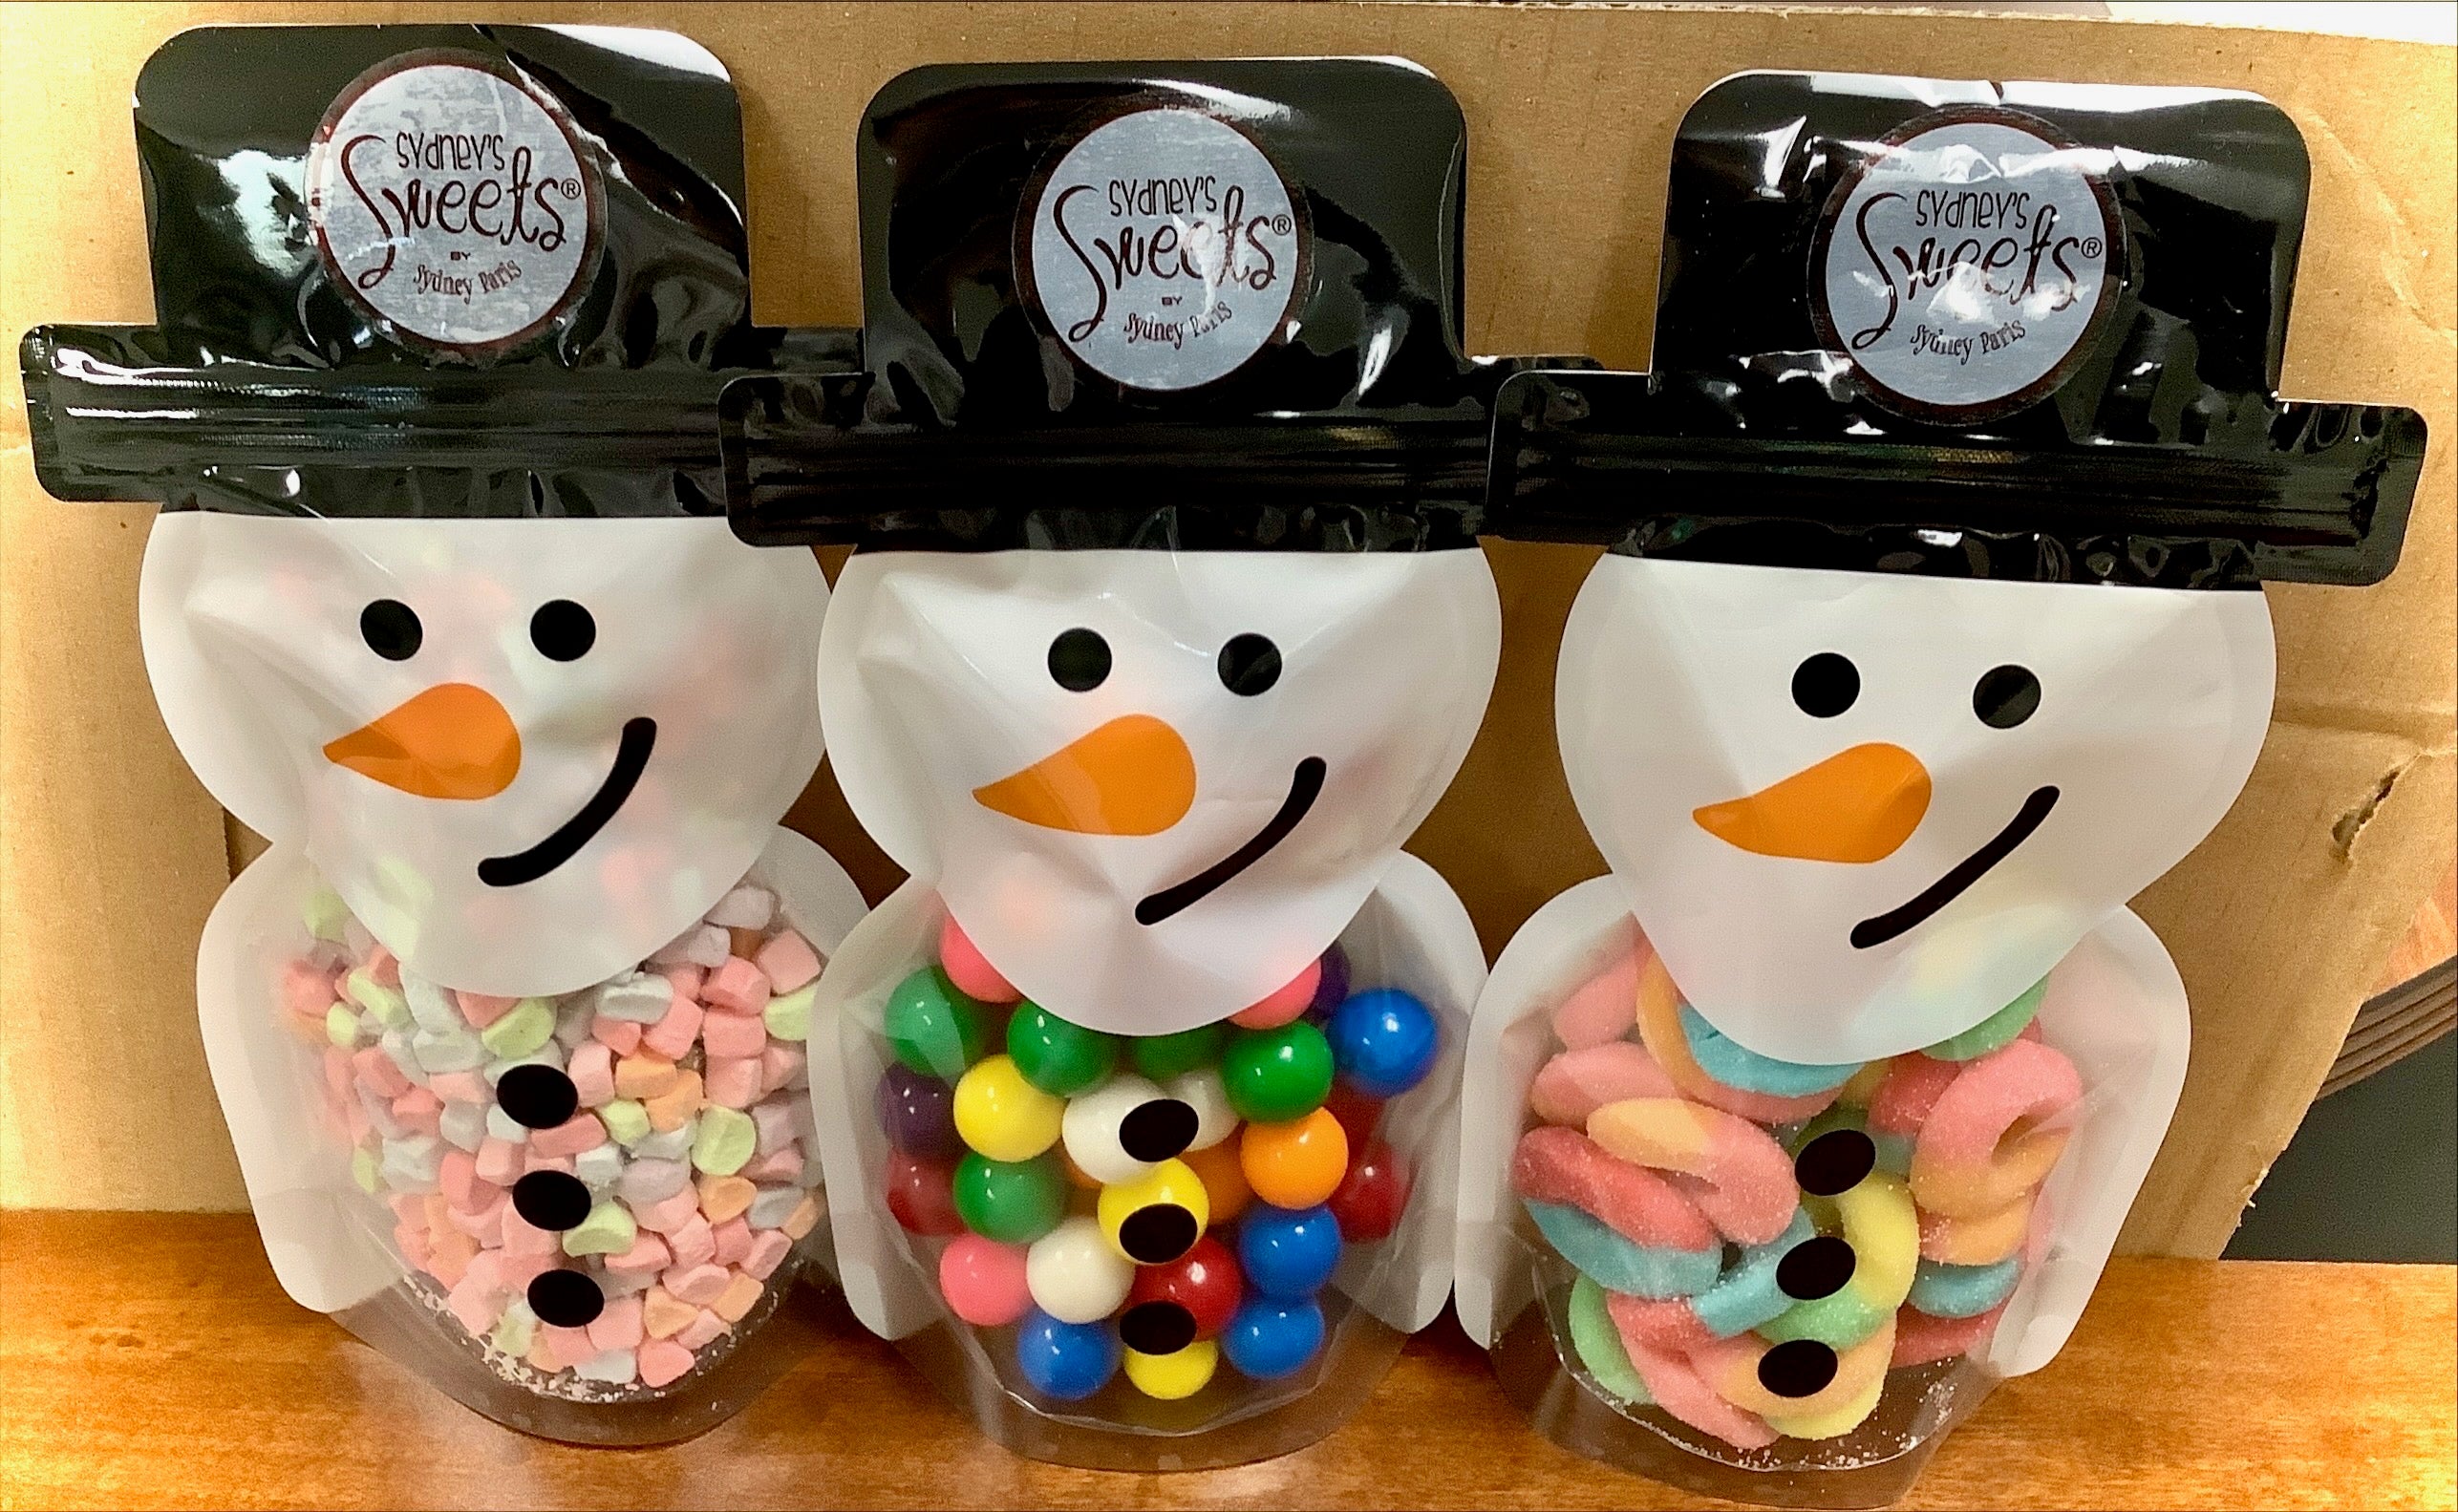 Snowman Candy Bags